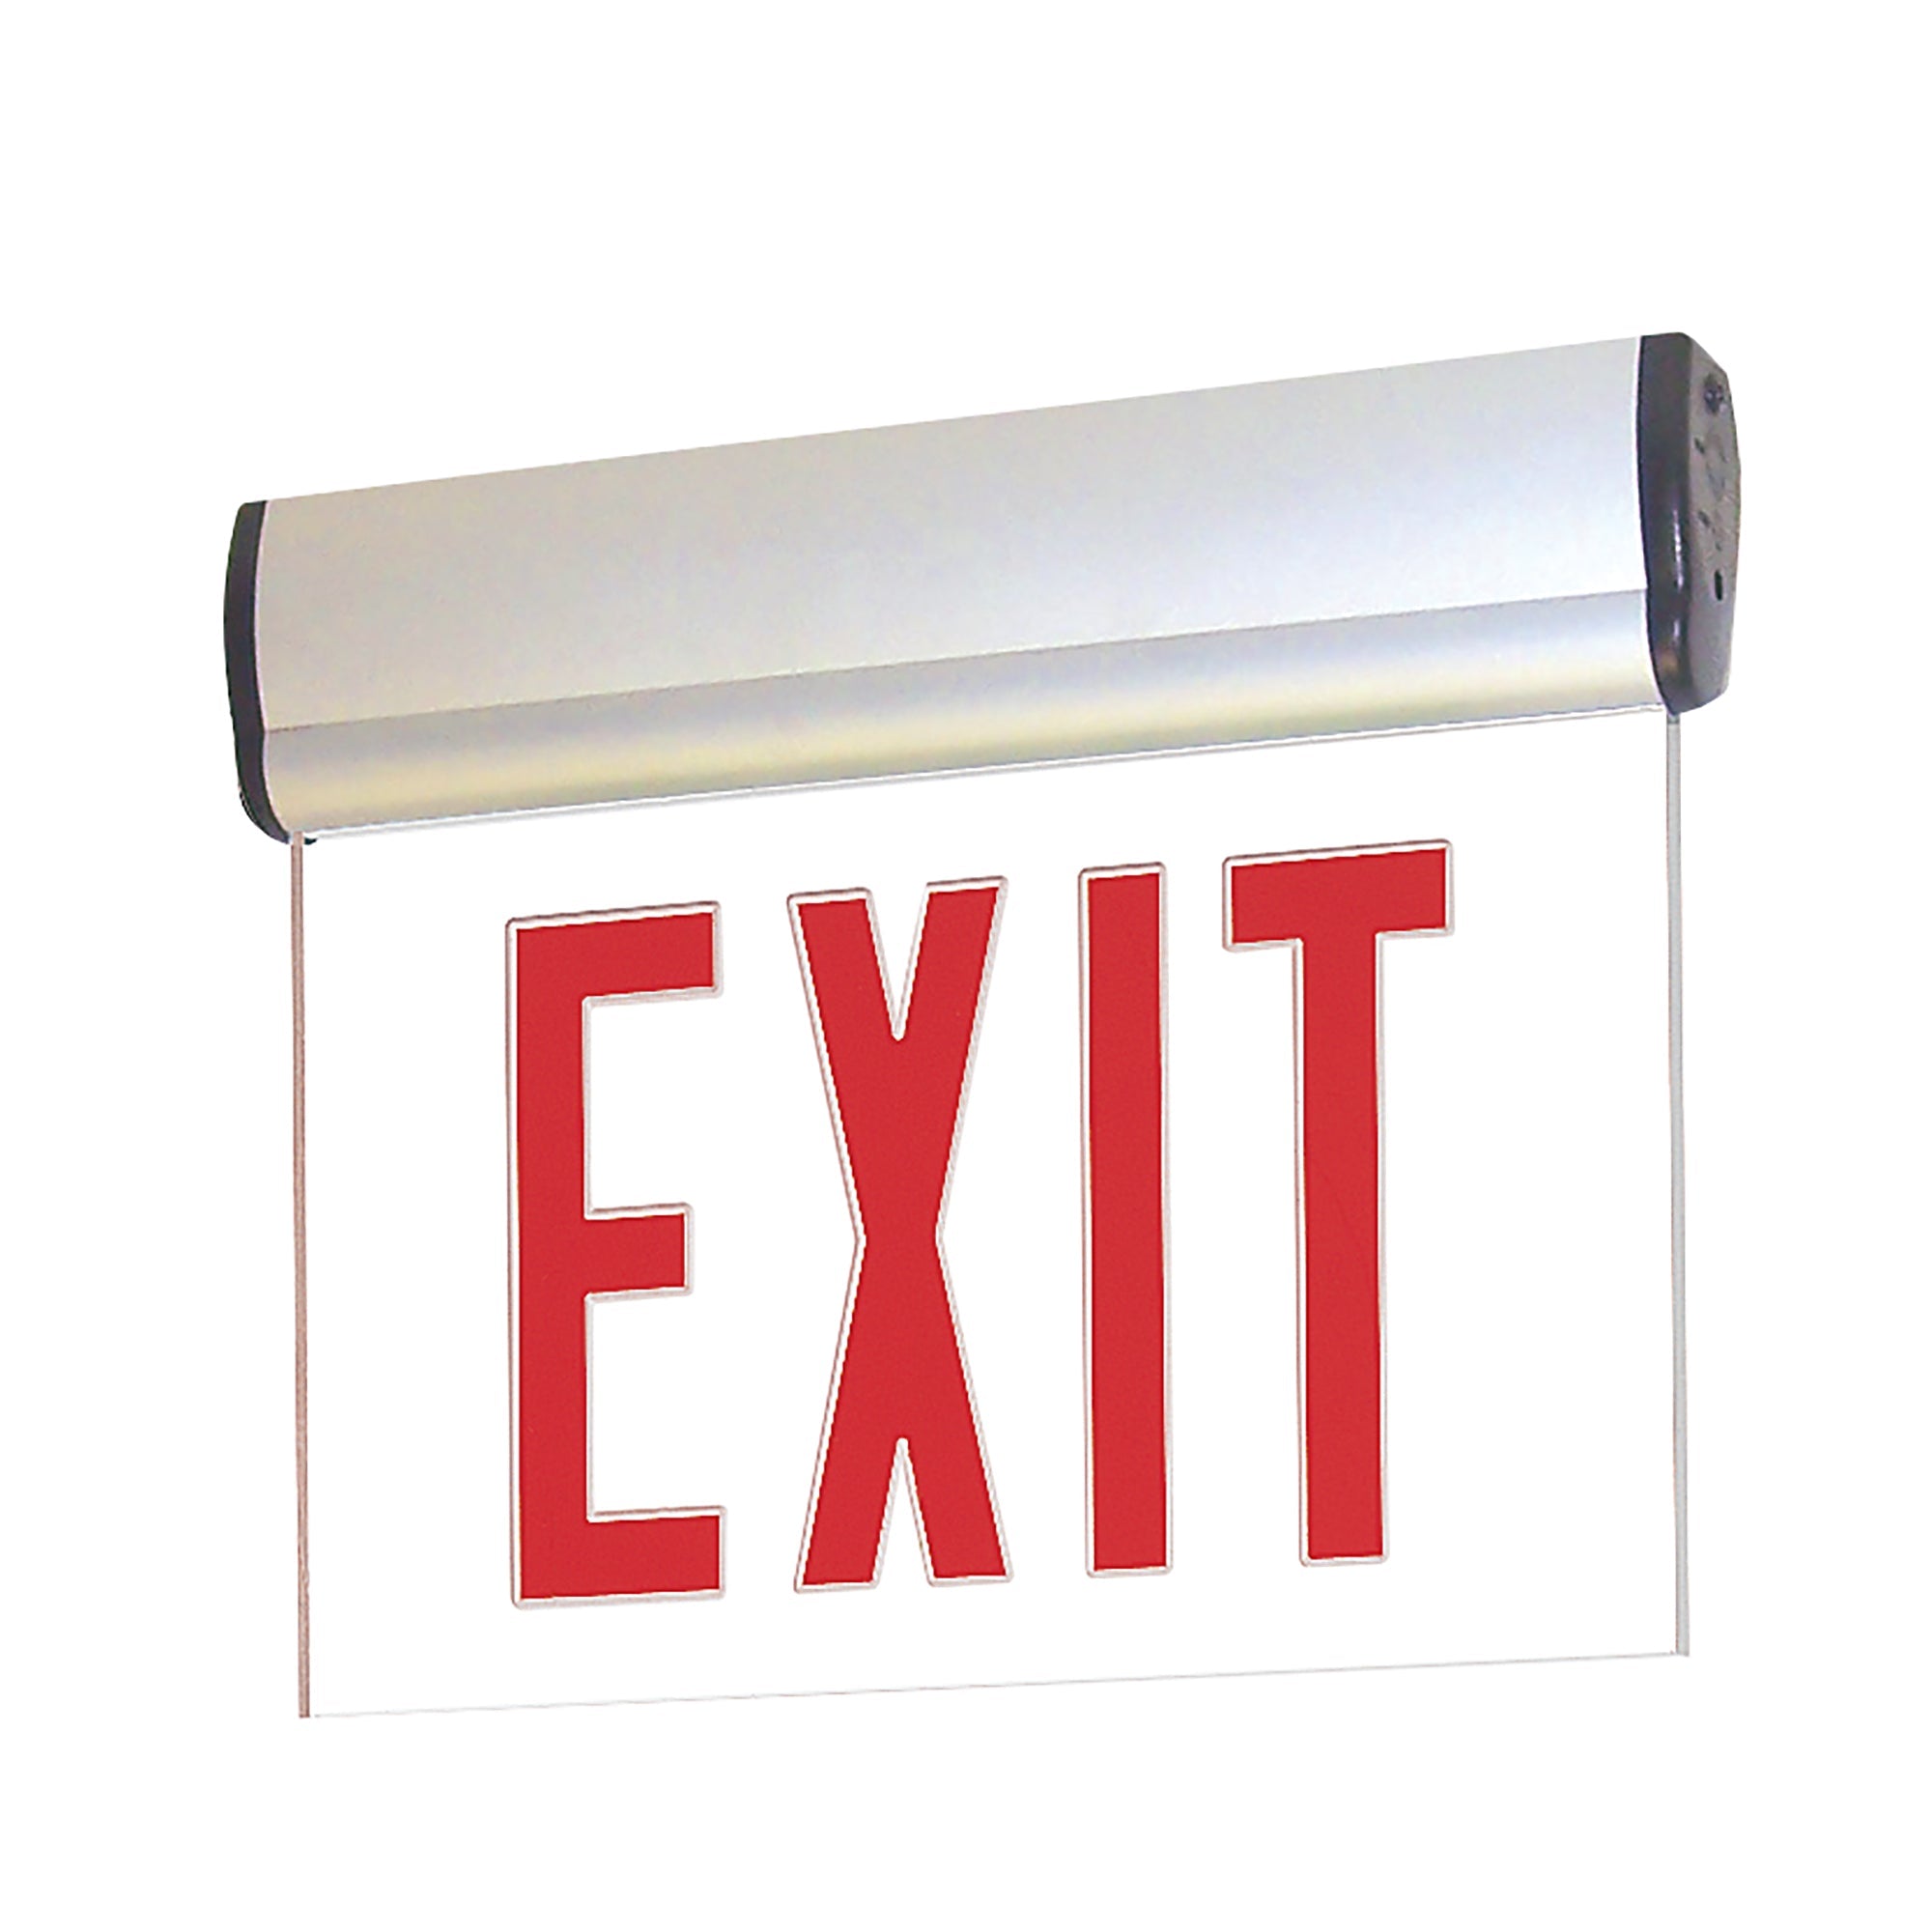 Nora Lighting NX-810-LEDRMA - Exit / Emergency - Surface Adjustable LED Edge-Lit Exit Sign, AC Only, 6 Inch Red Letters, Single Face / Mirrored Acrylic, Aluminum Housing